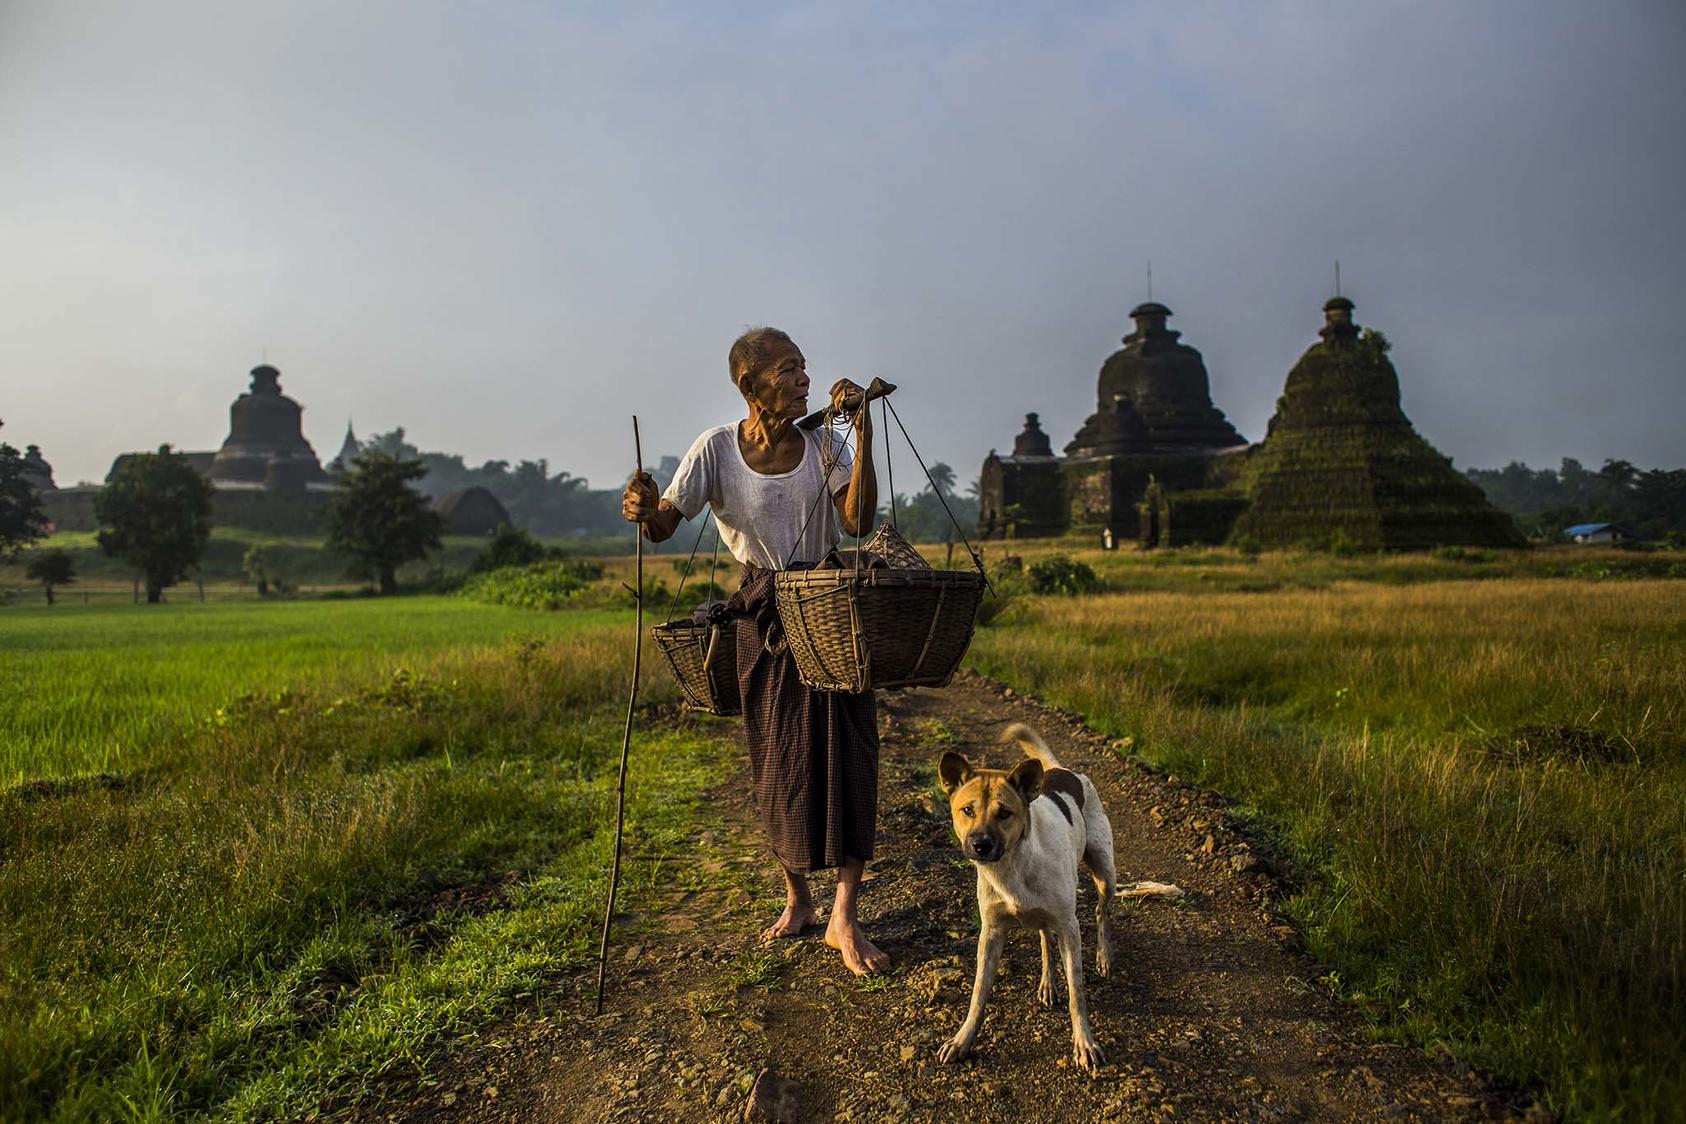 An 85-year-old ethnic Rakhine man on his way to work in their family's garden planting flowers, in Mrauk U, Myanmar. Sept. 12, 2018. (Minzayar Oo/The New York Times)